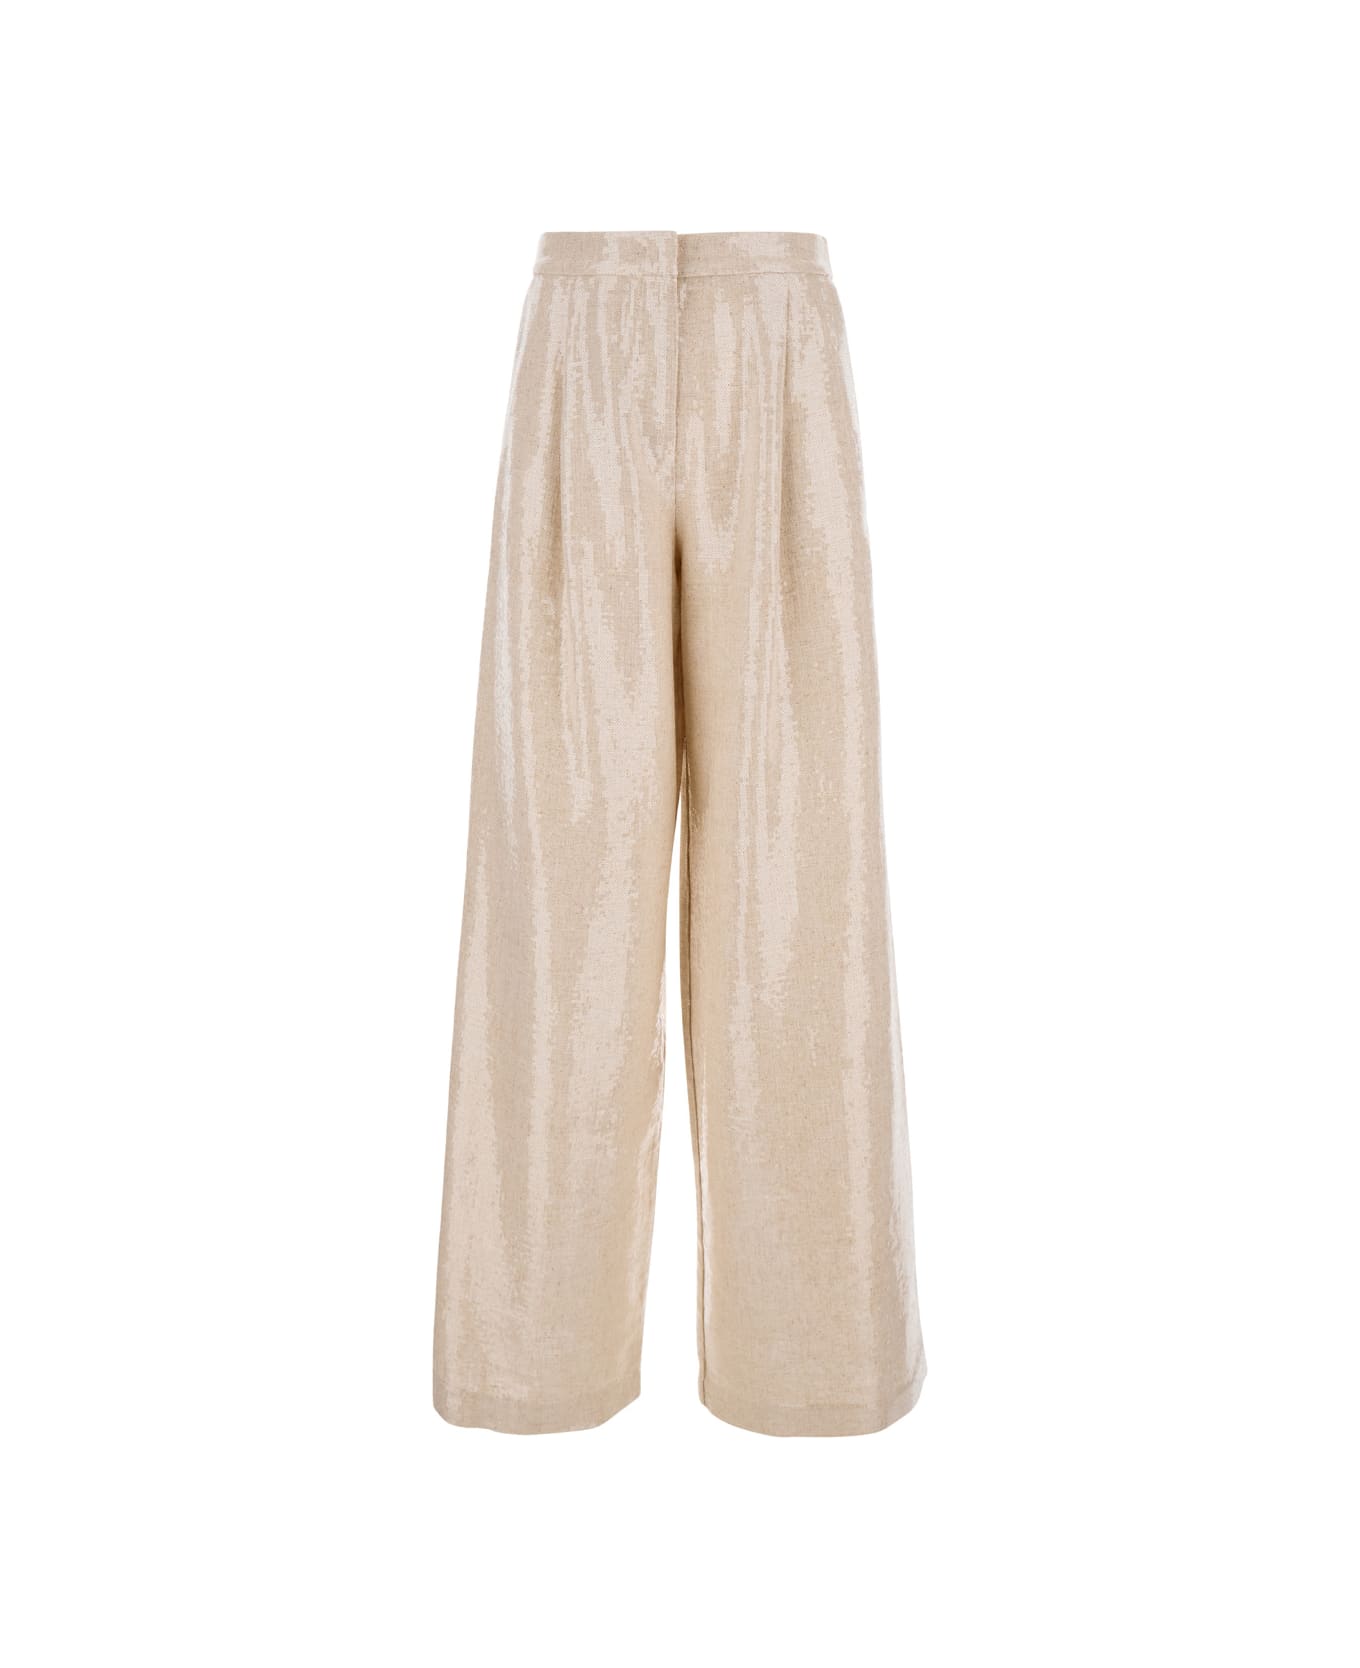 Federica Tosi Pink Trousers With Sequins In Linen Blend Woman - Beige ボトムス